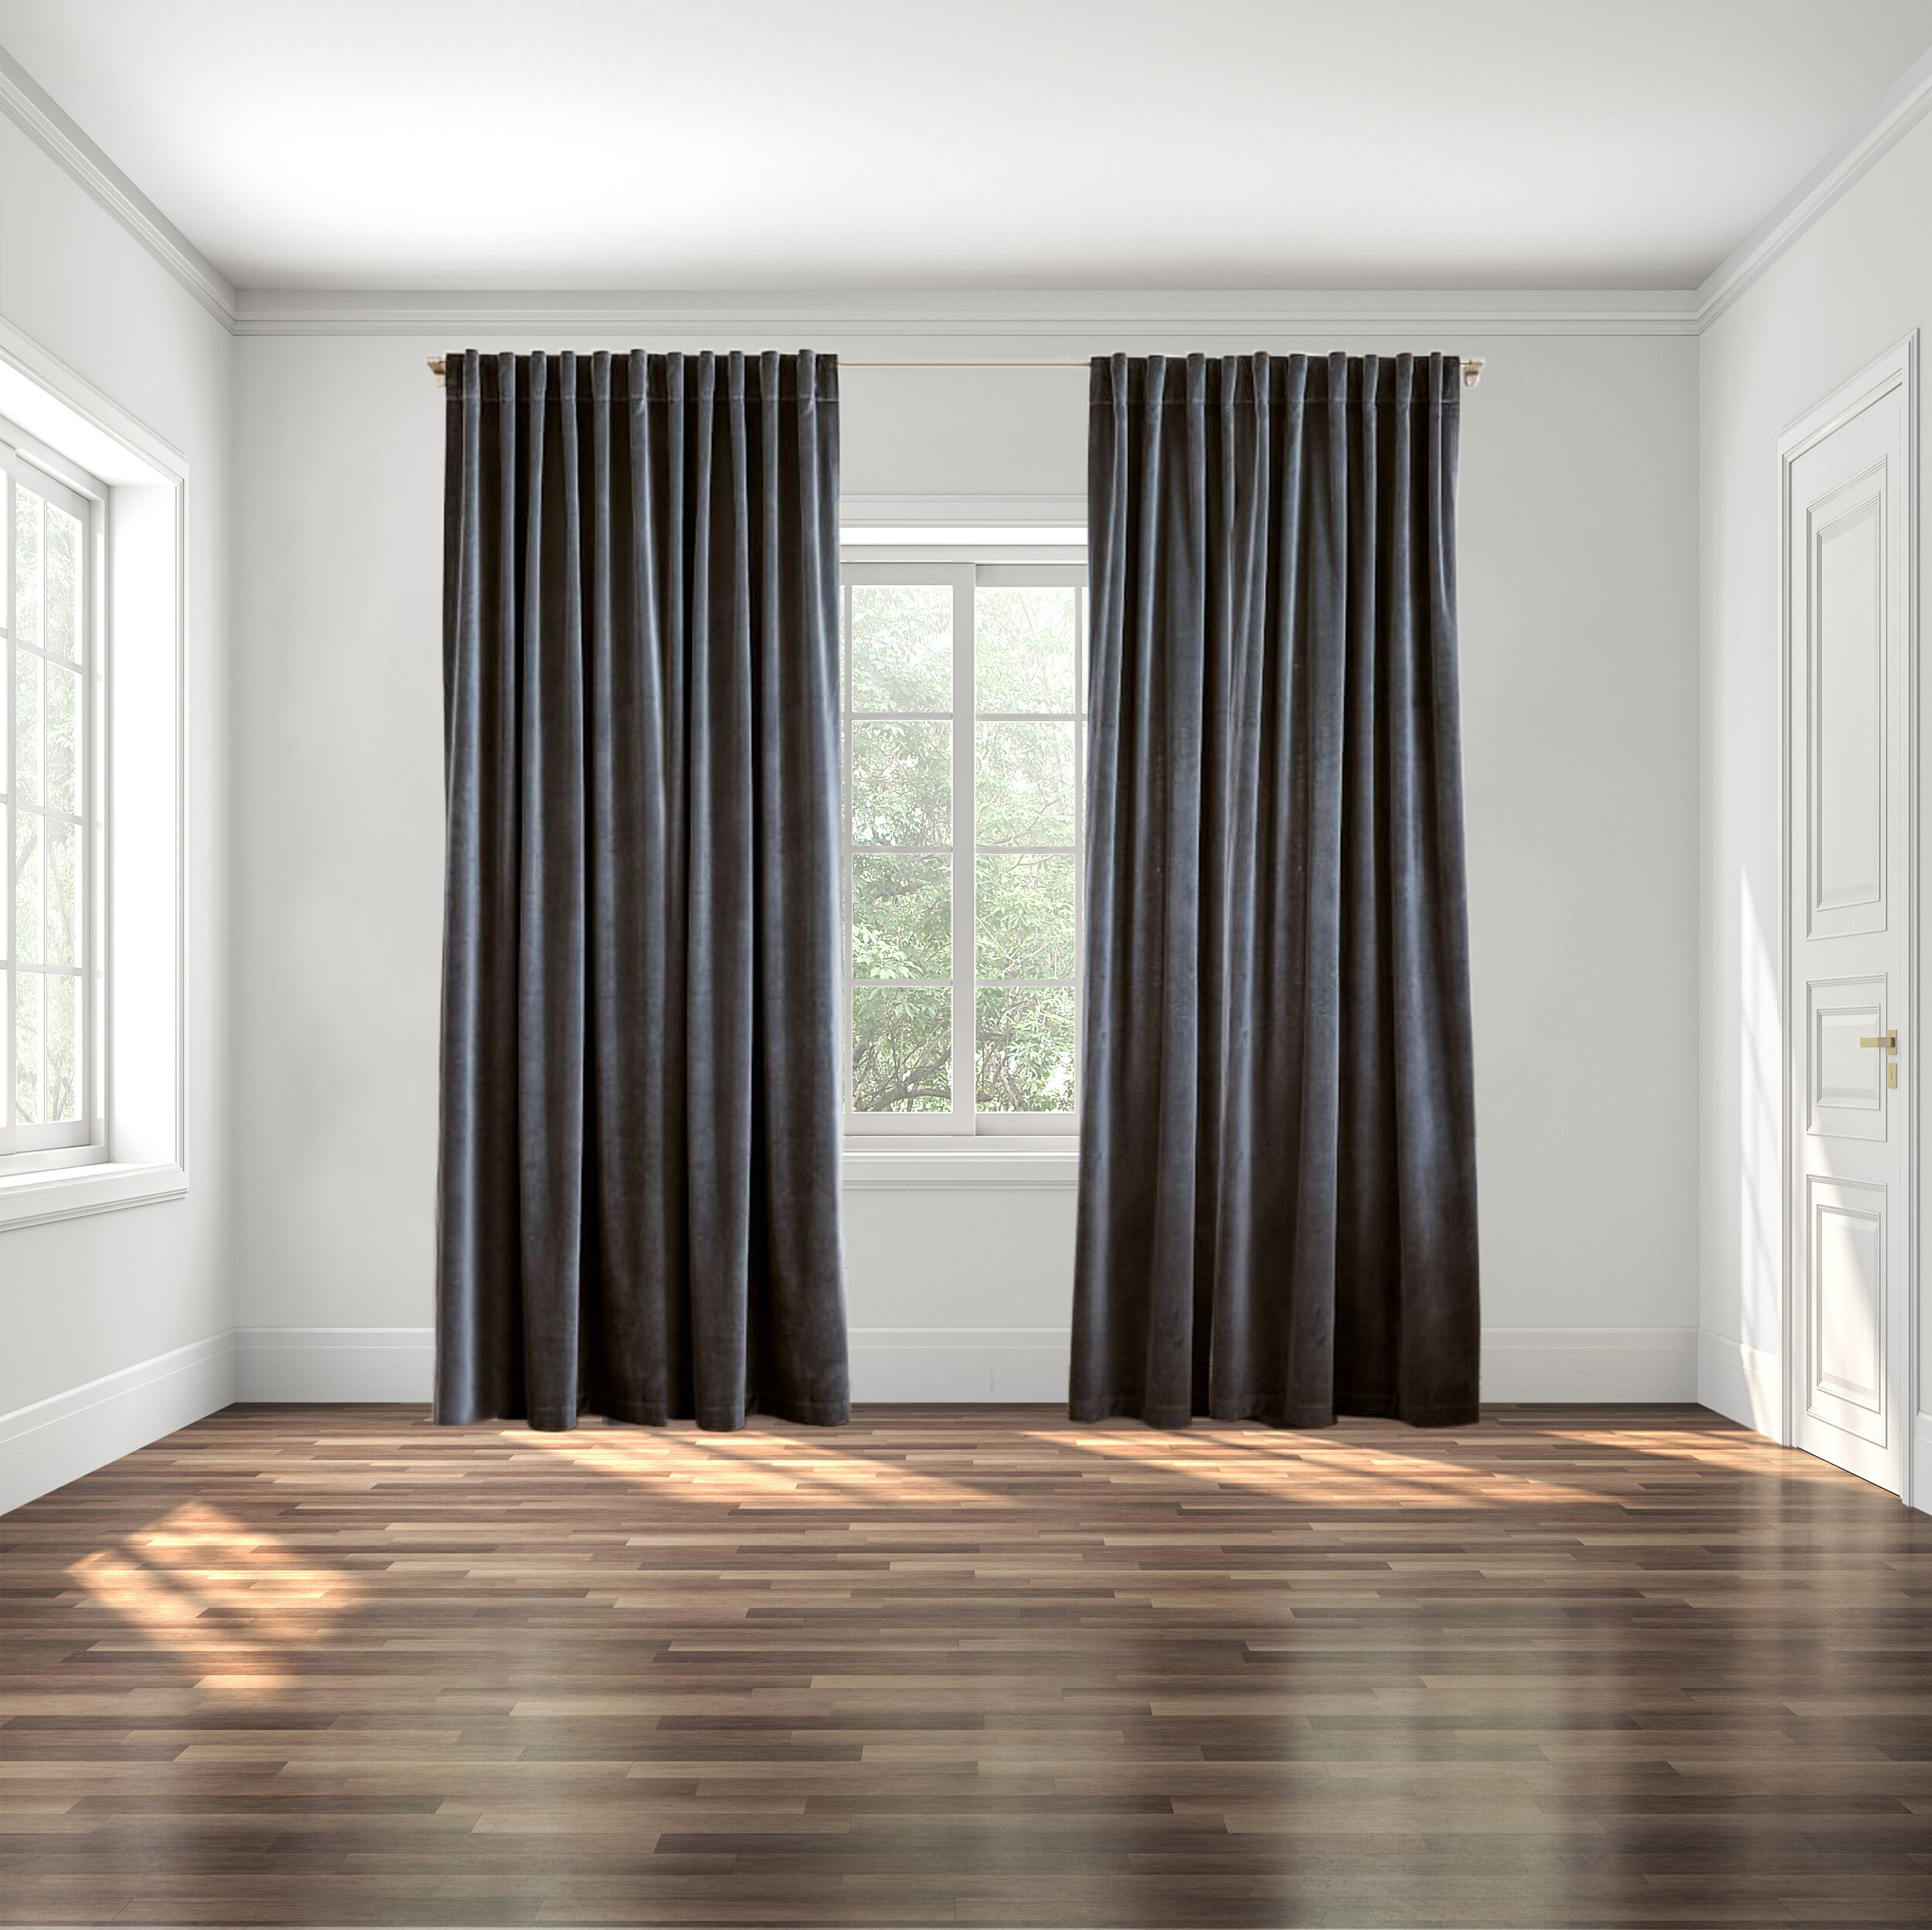 The Do S Don Ts Of Curtain Placement, How To Curtain A Wide Window